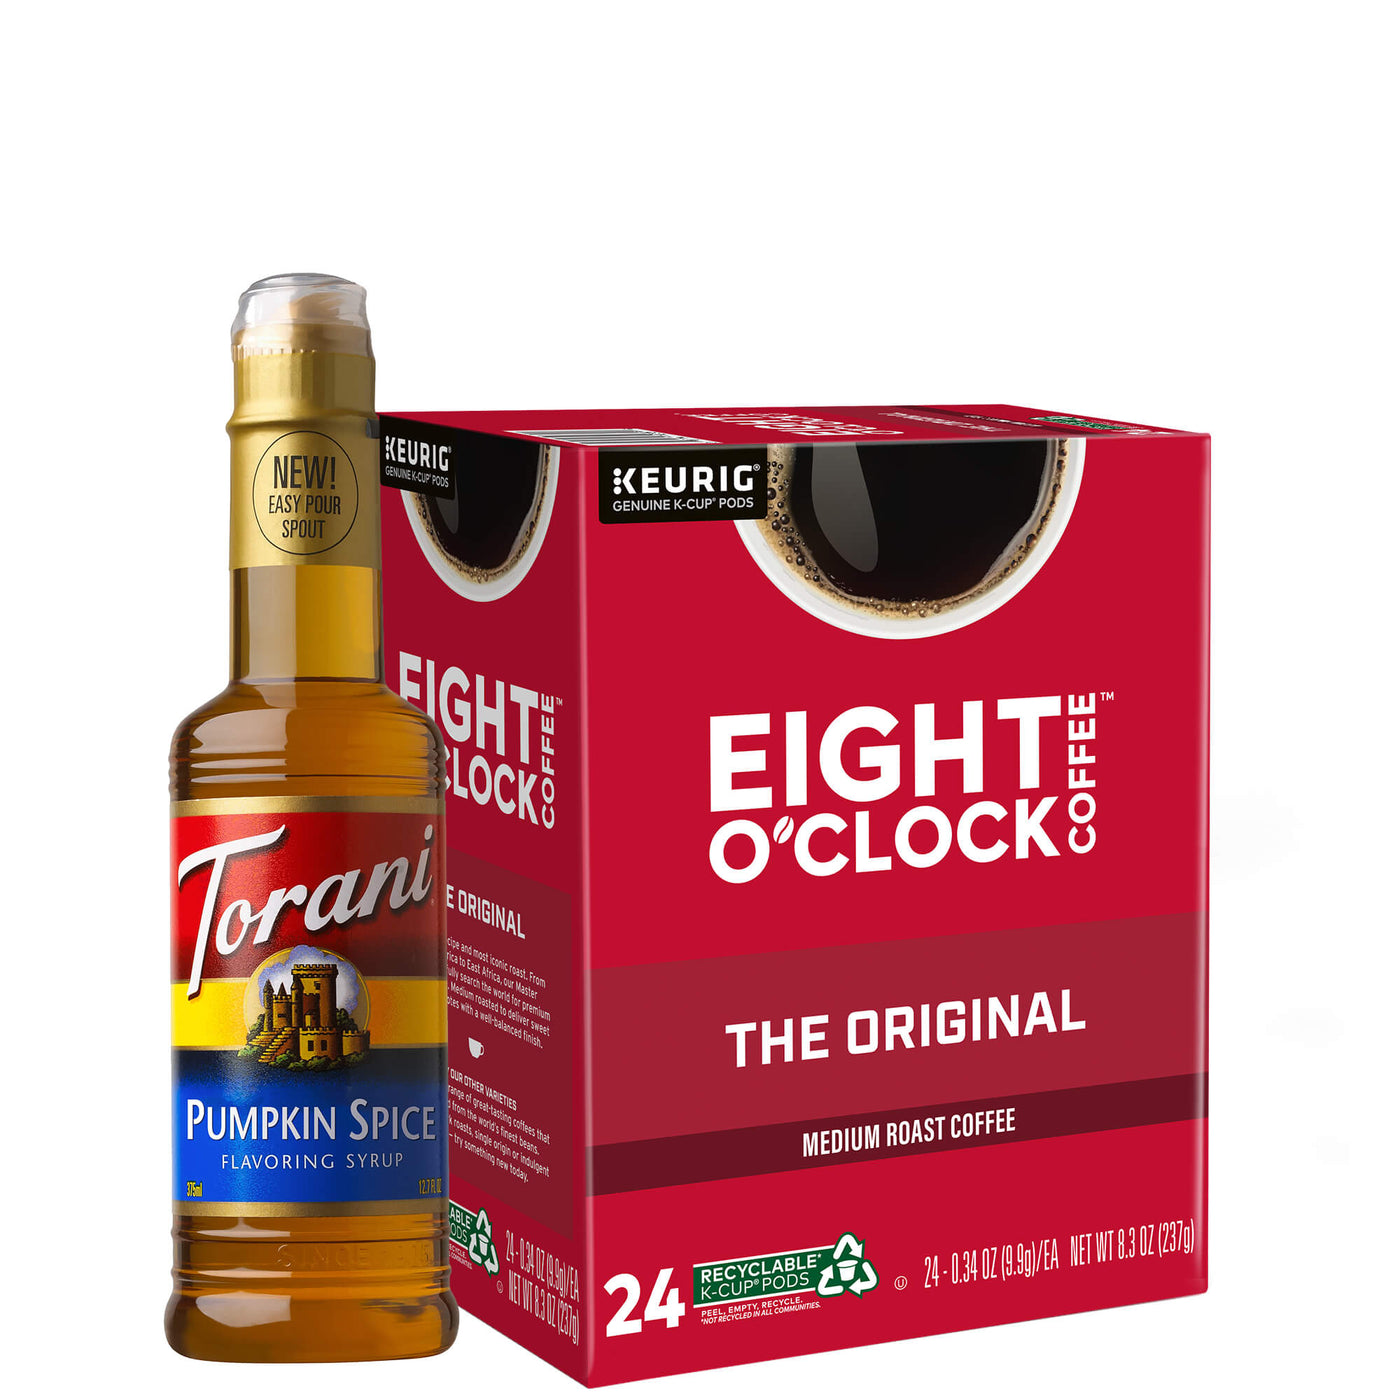 includes a 375 ml bottle of Torani Pumpkin Spice Syrup and a 48-count box of Eight O'Clock Original Blend K-Cup® Pods.